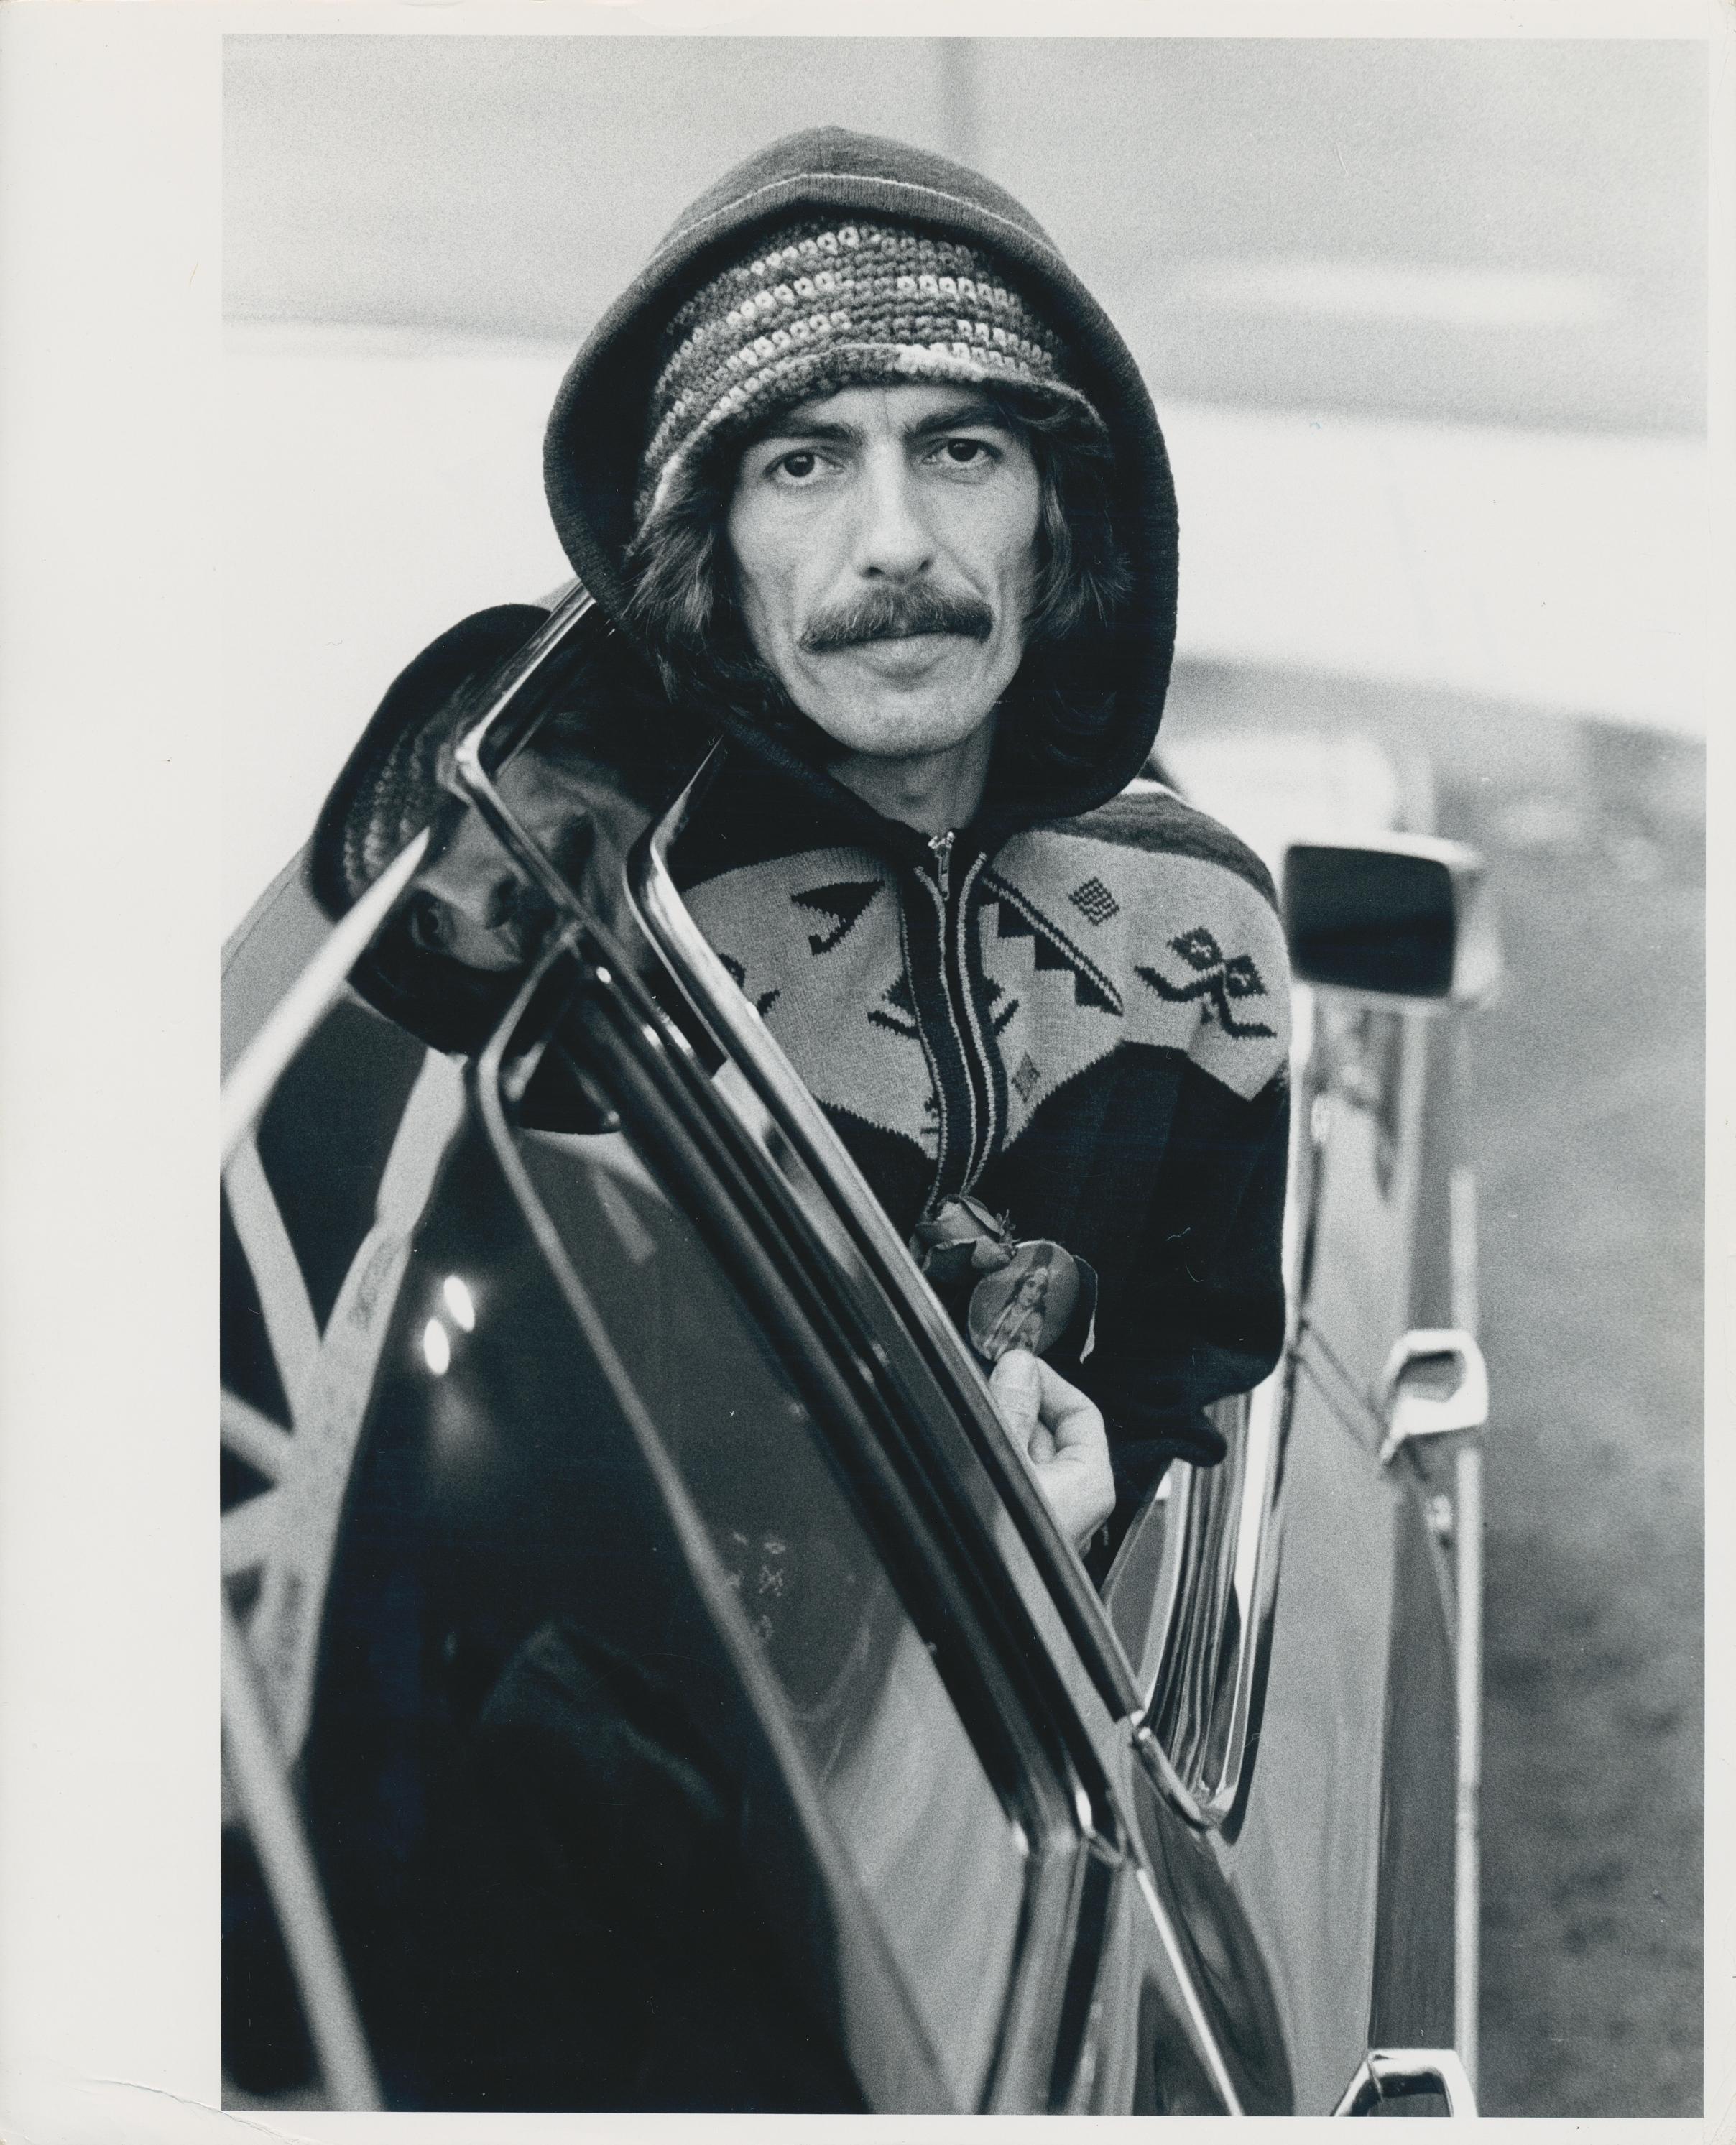 Henry Grossman Portrait Photograph - George Harrison in Car, Black and White Photography, 25, 4 x 20, 6 cm